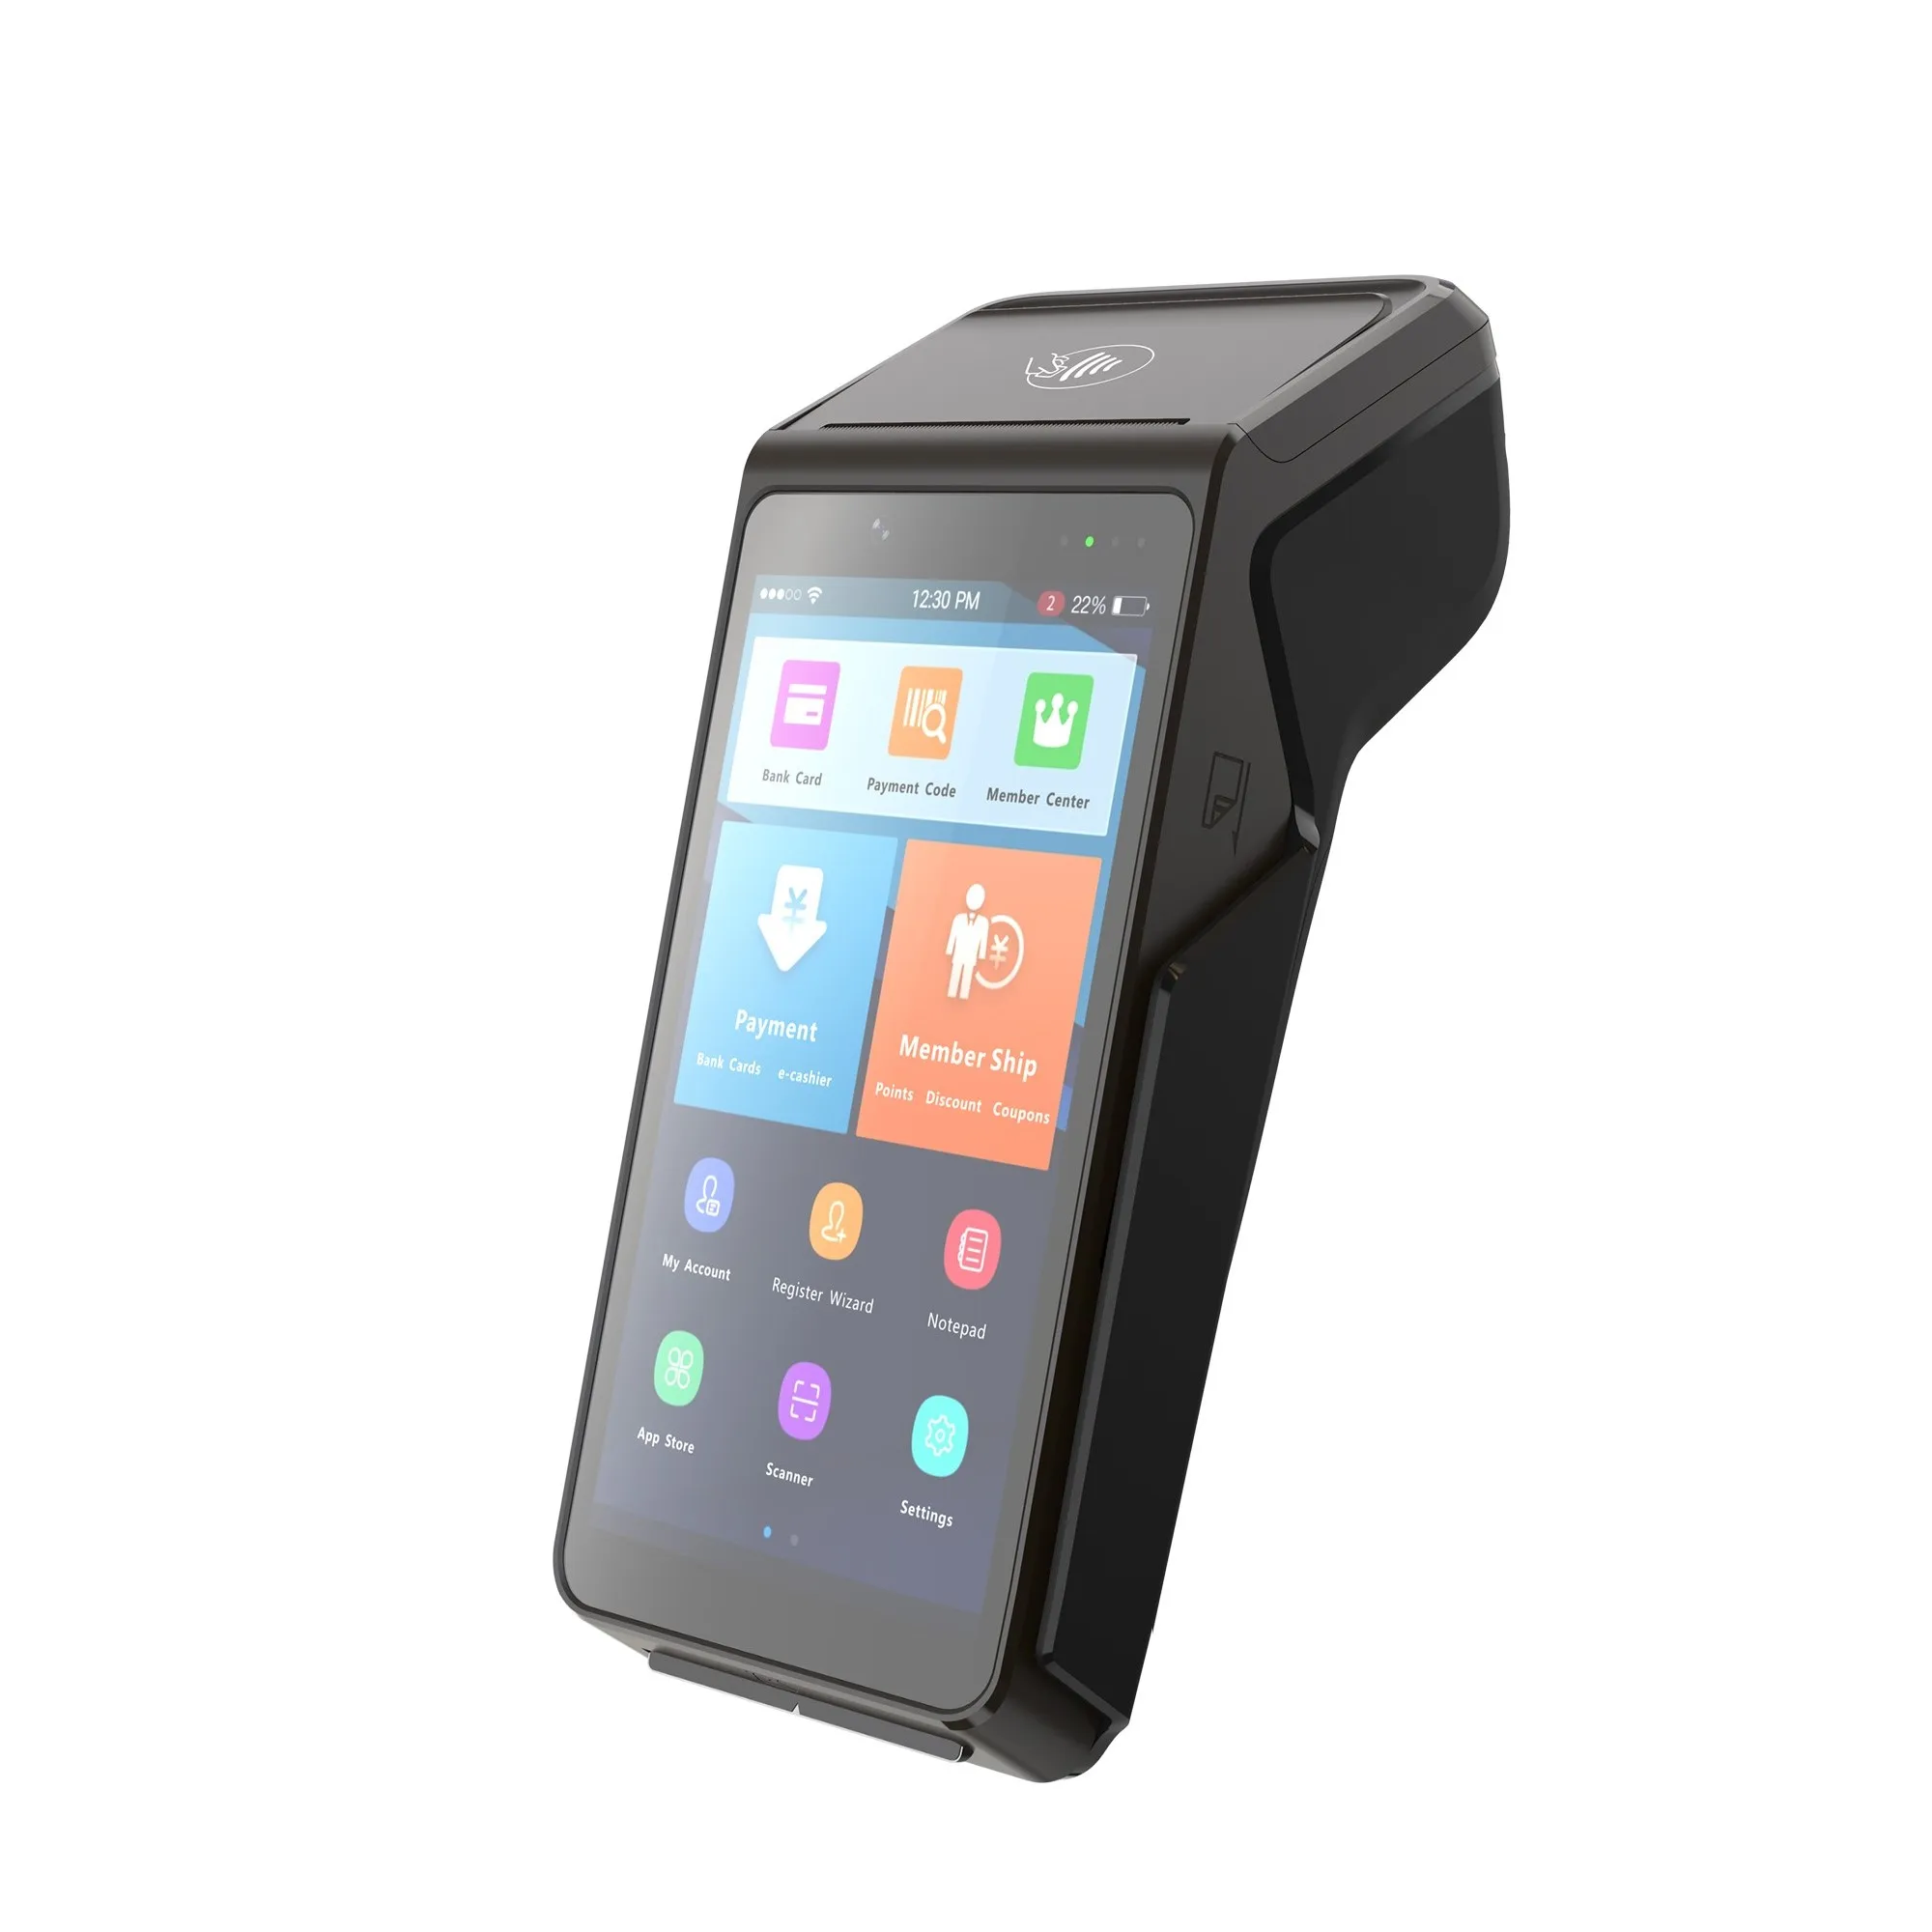 

nfc all in one pos machine smart touch screen pos system handheld 4g android electronic payment terminal device